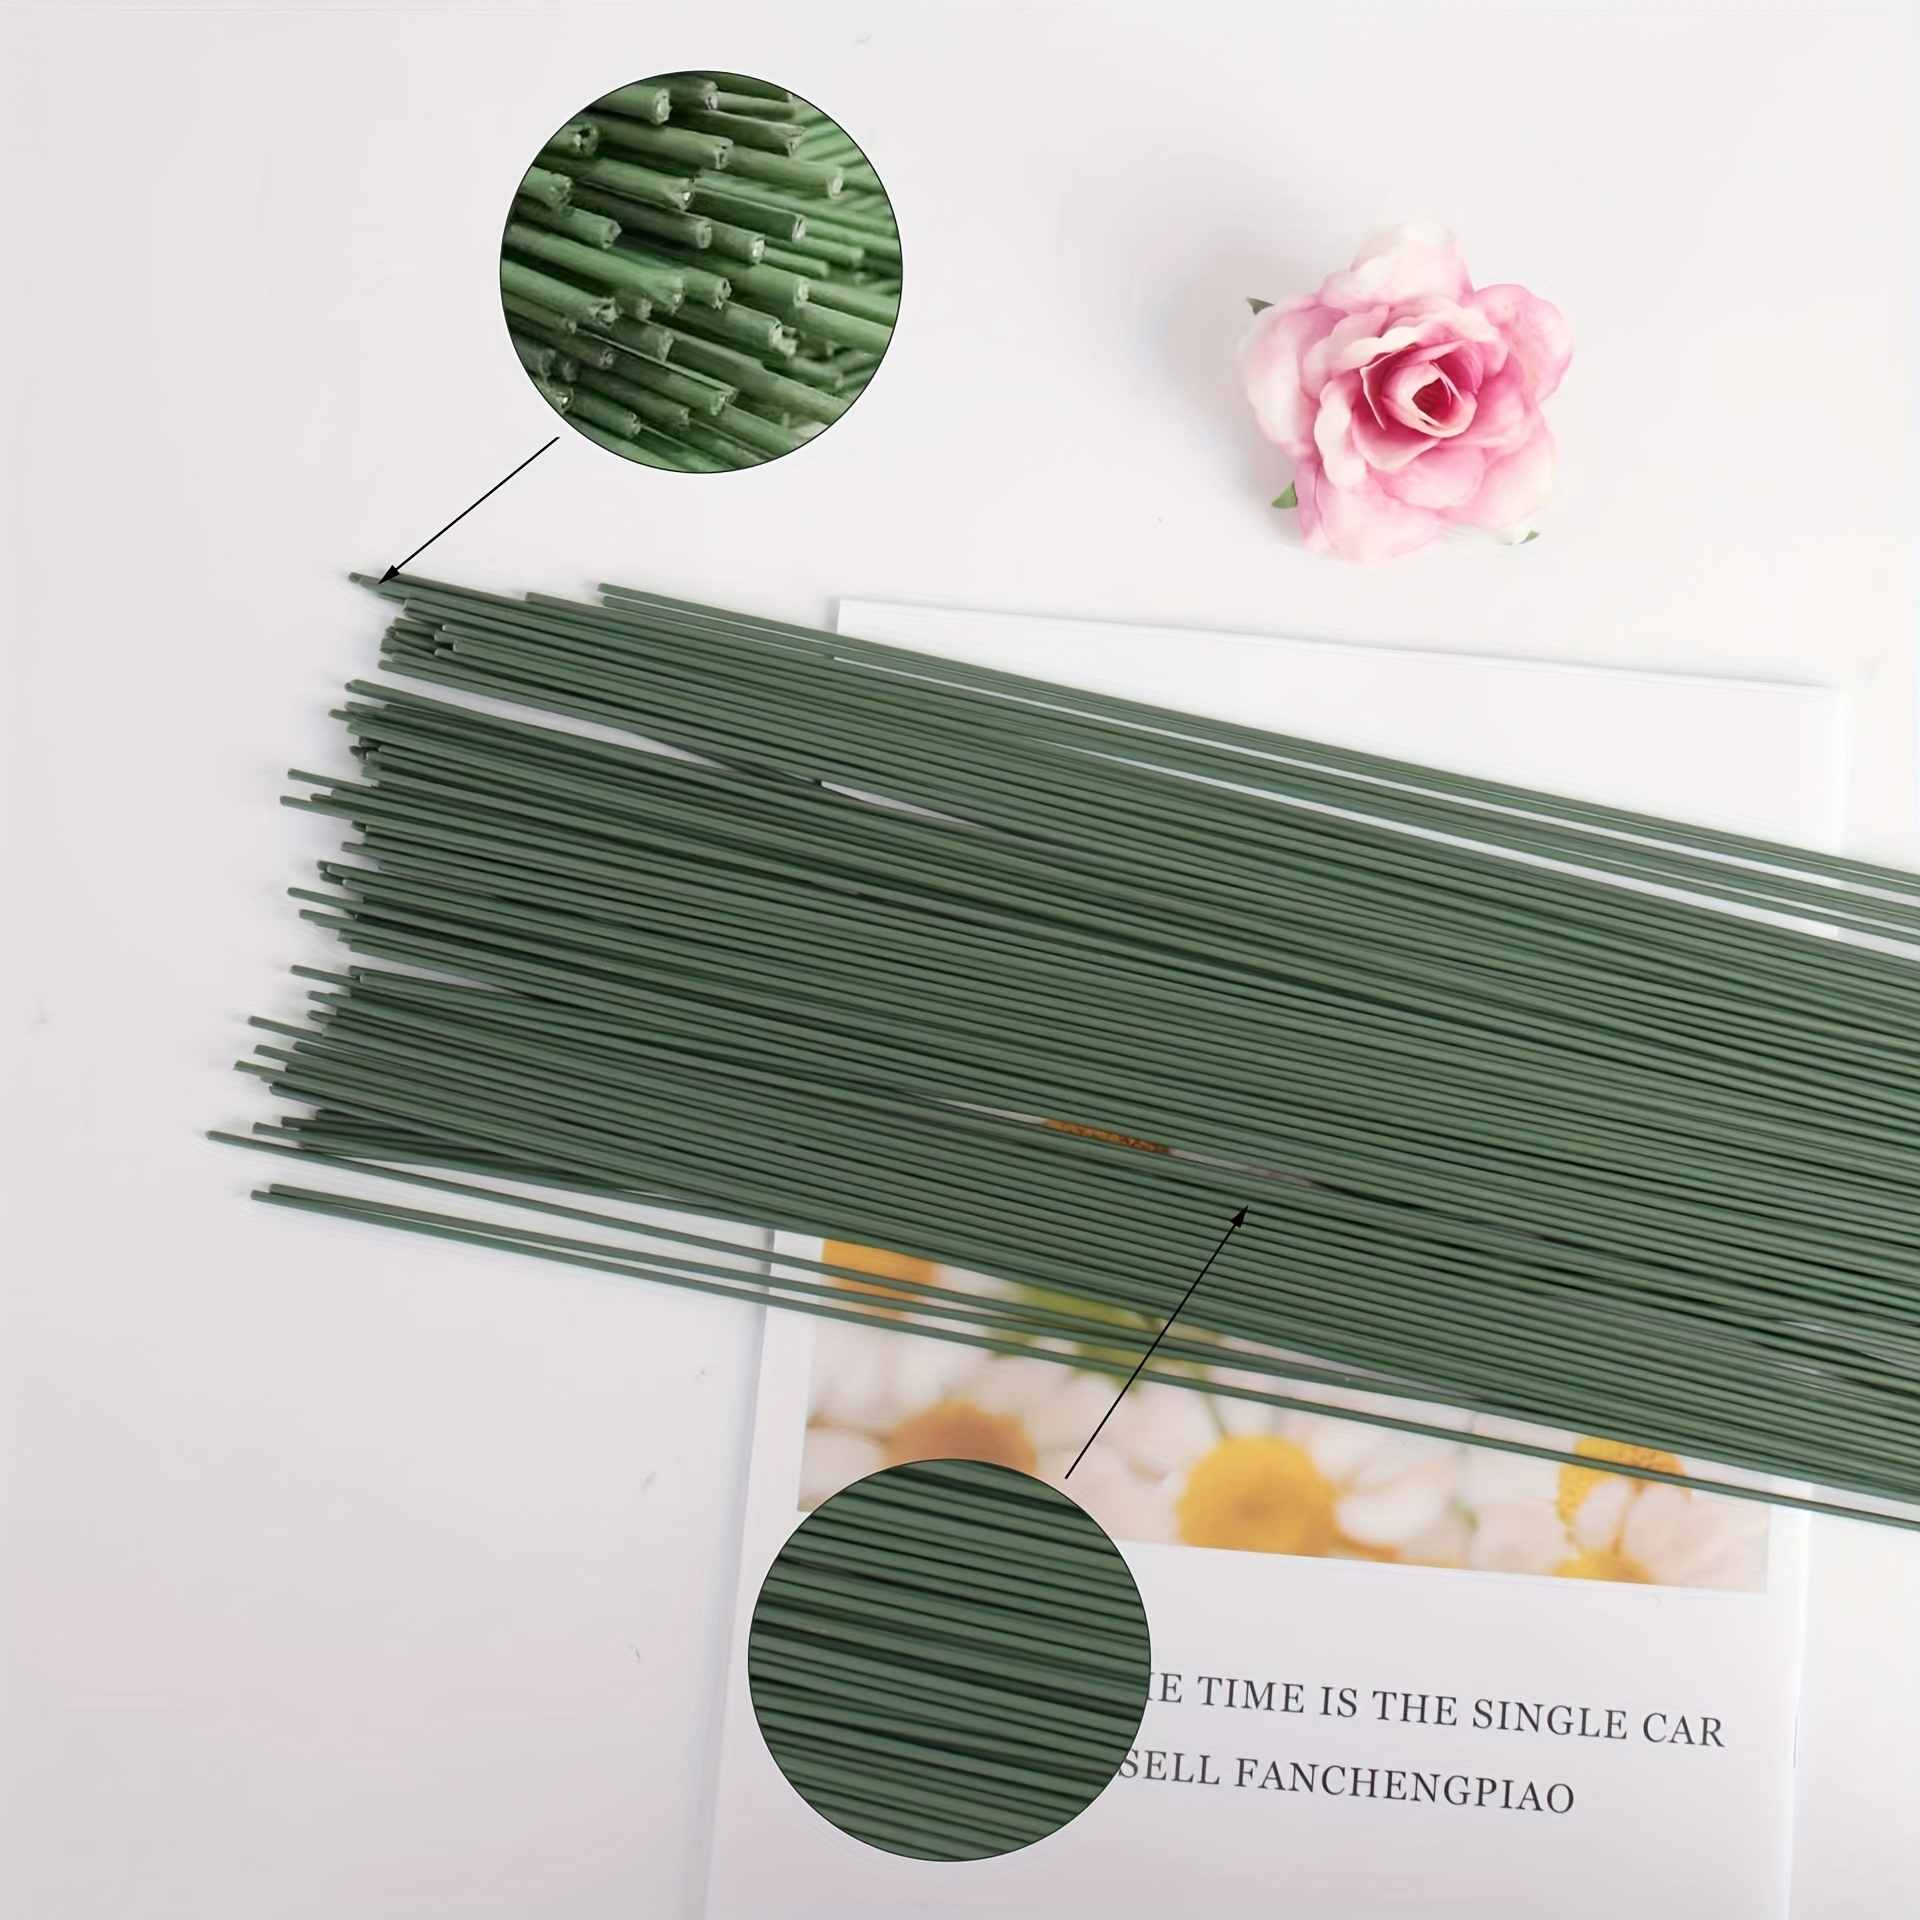 Protoiya 7 Pcs Floral Arrangement Kit Floral Tape and Floral Wire with Wire  Cutter Green Floral Tapes Floral Stem Wire 40 Pcs Corsage Pins for Bouquet  Wreath Making Supplies 